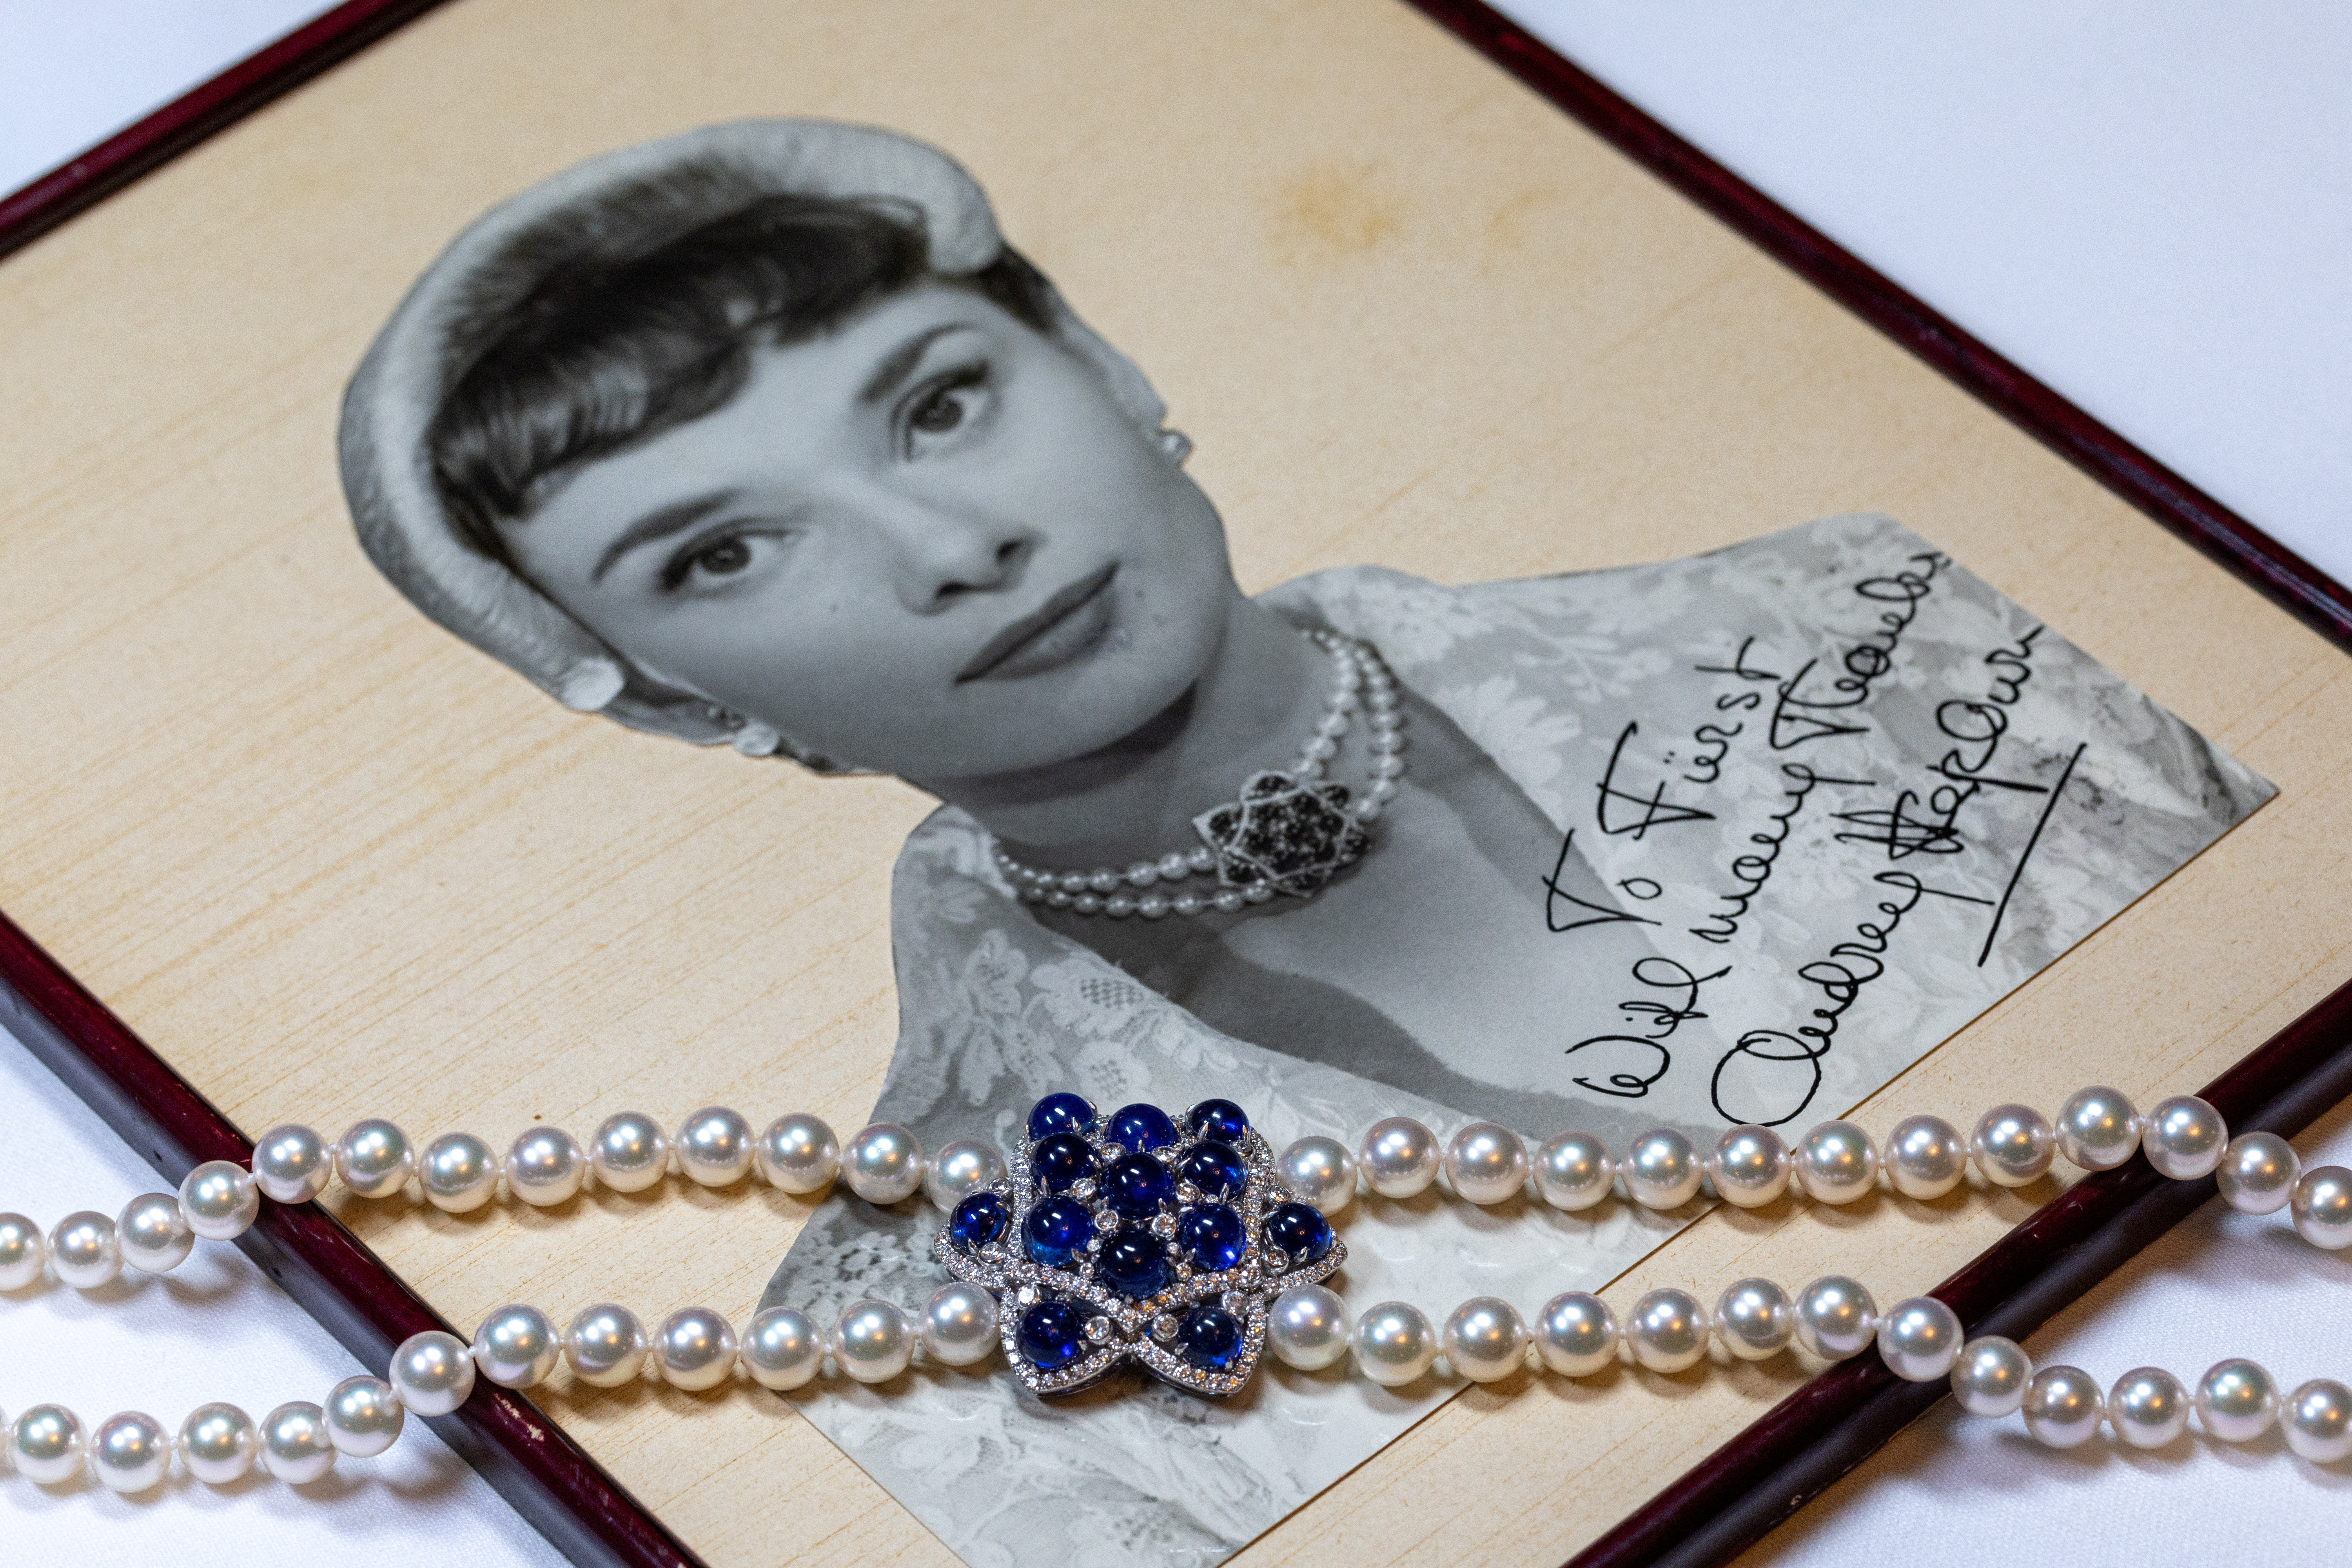 A pearl necklace worn by Audrey Hepburn in the final scene of the movie "Roman Holiday" is seen at Christie’s in Geneva